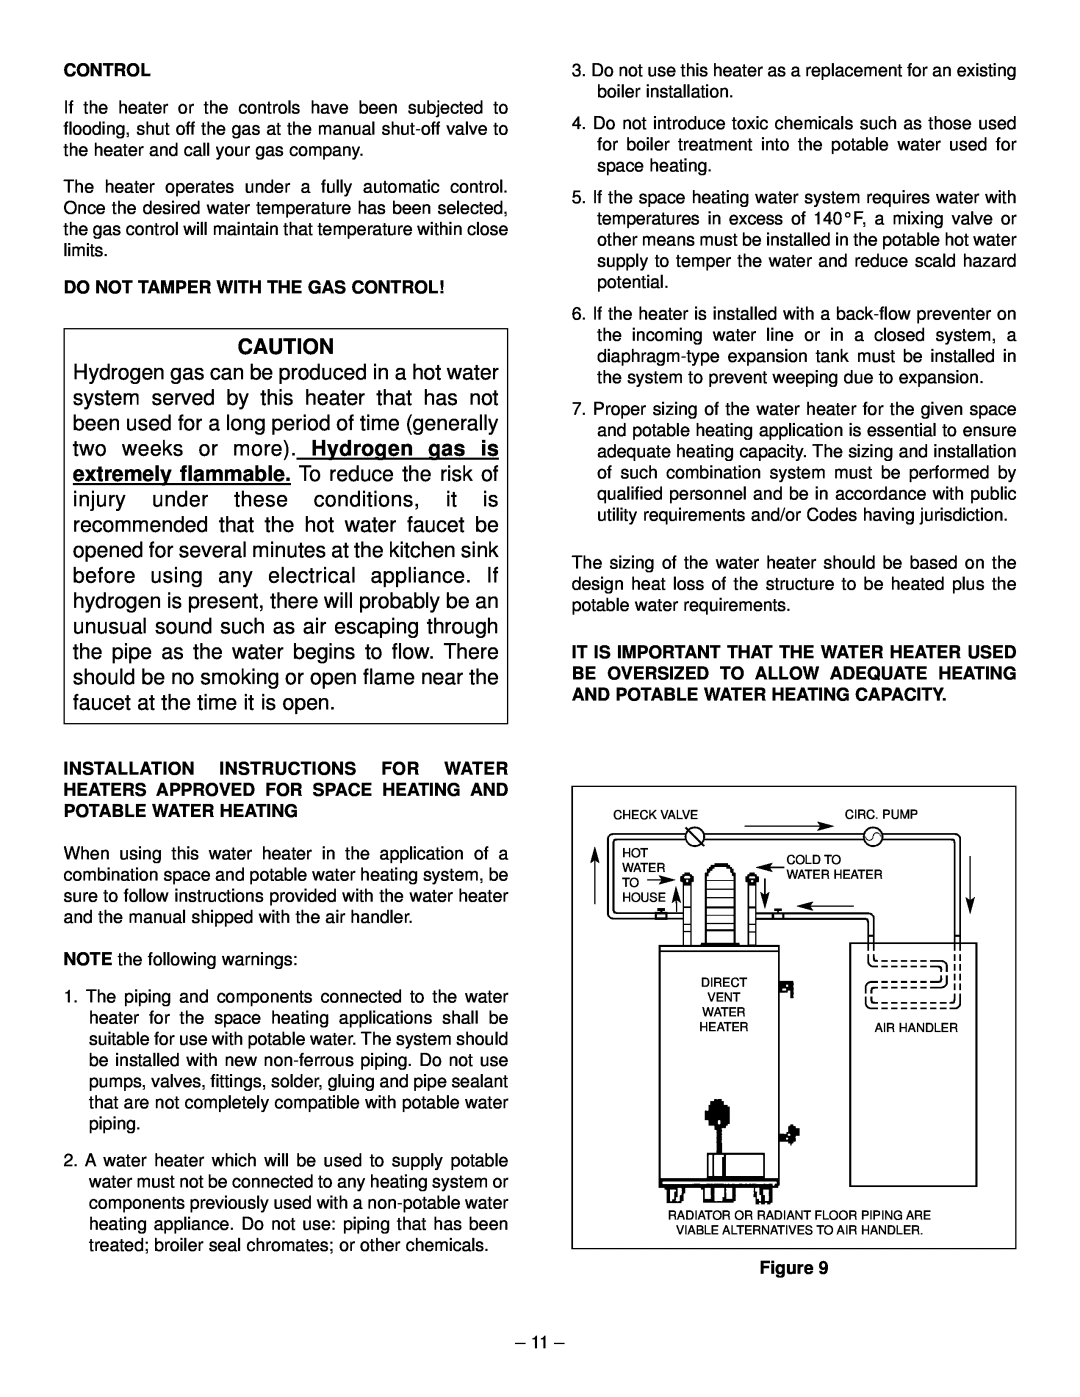 GSW PART NO.70999 REV.G (03-12) operating instructions Do Not Tamper With The Gas Control 